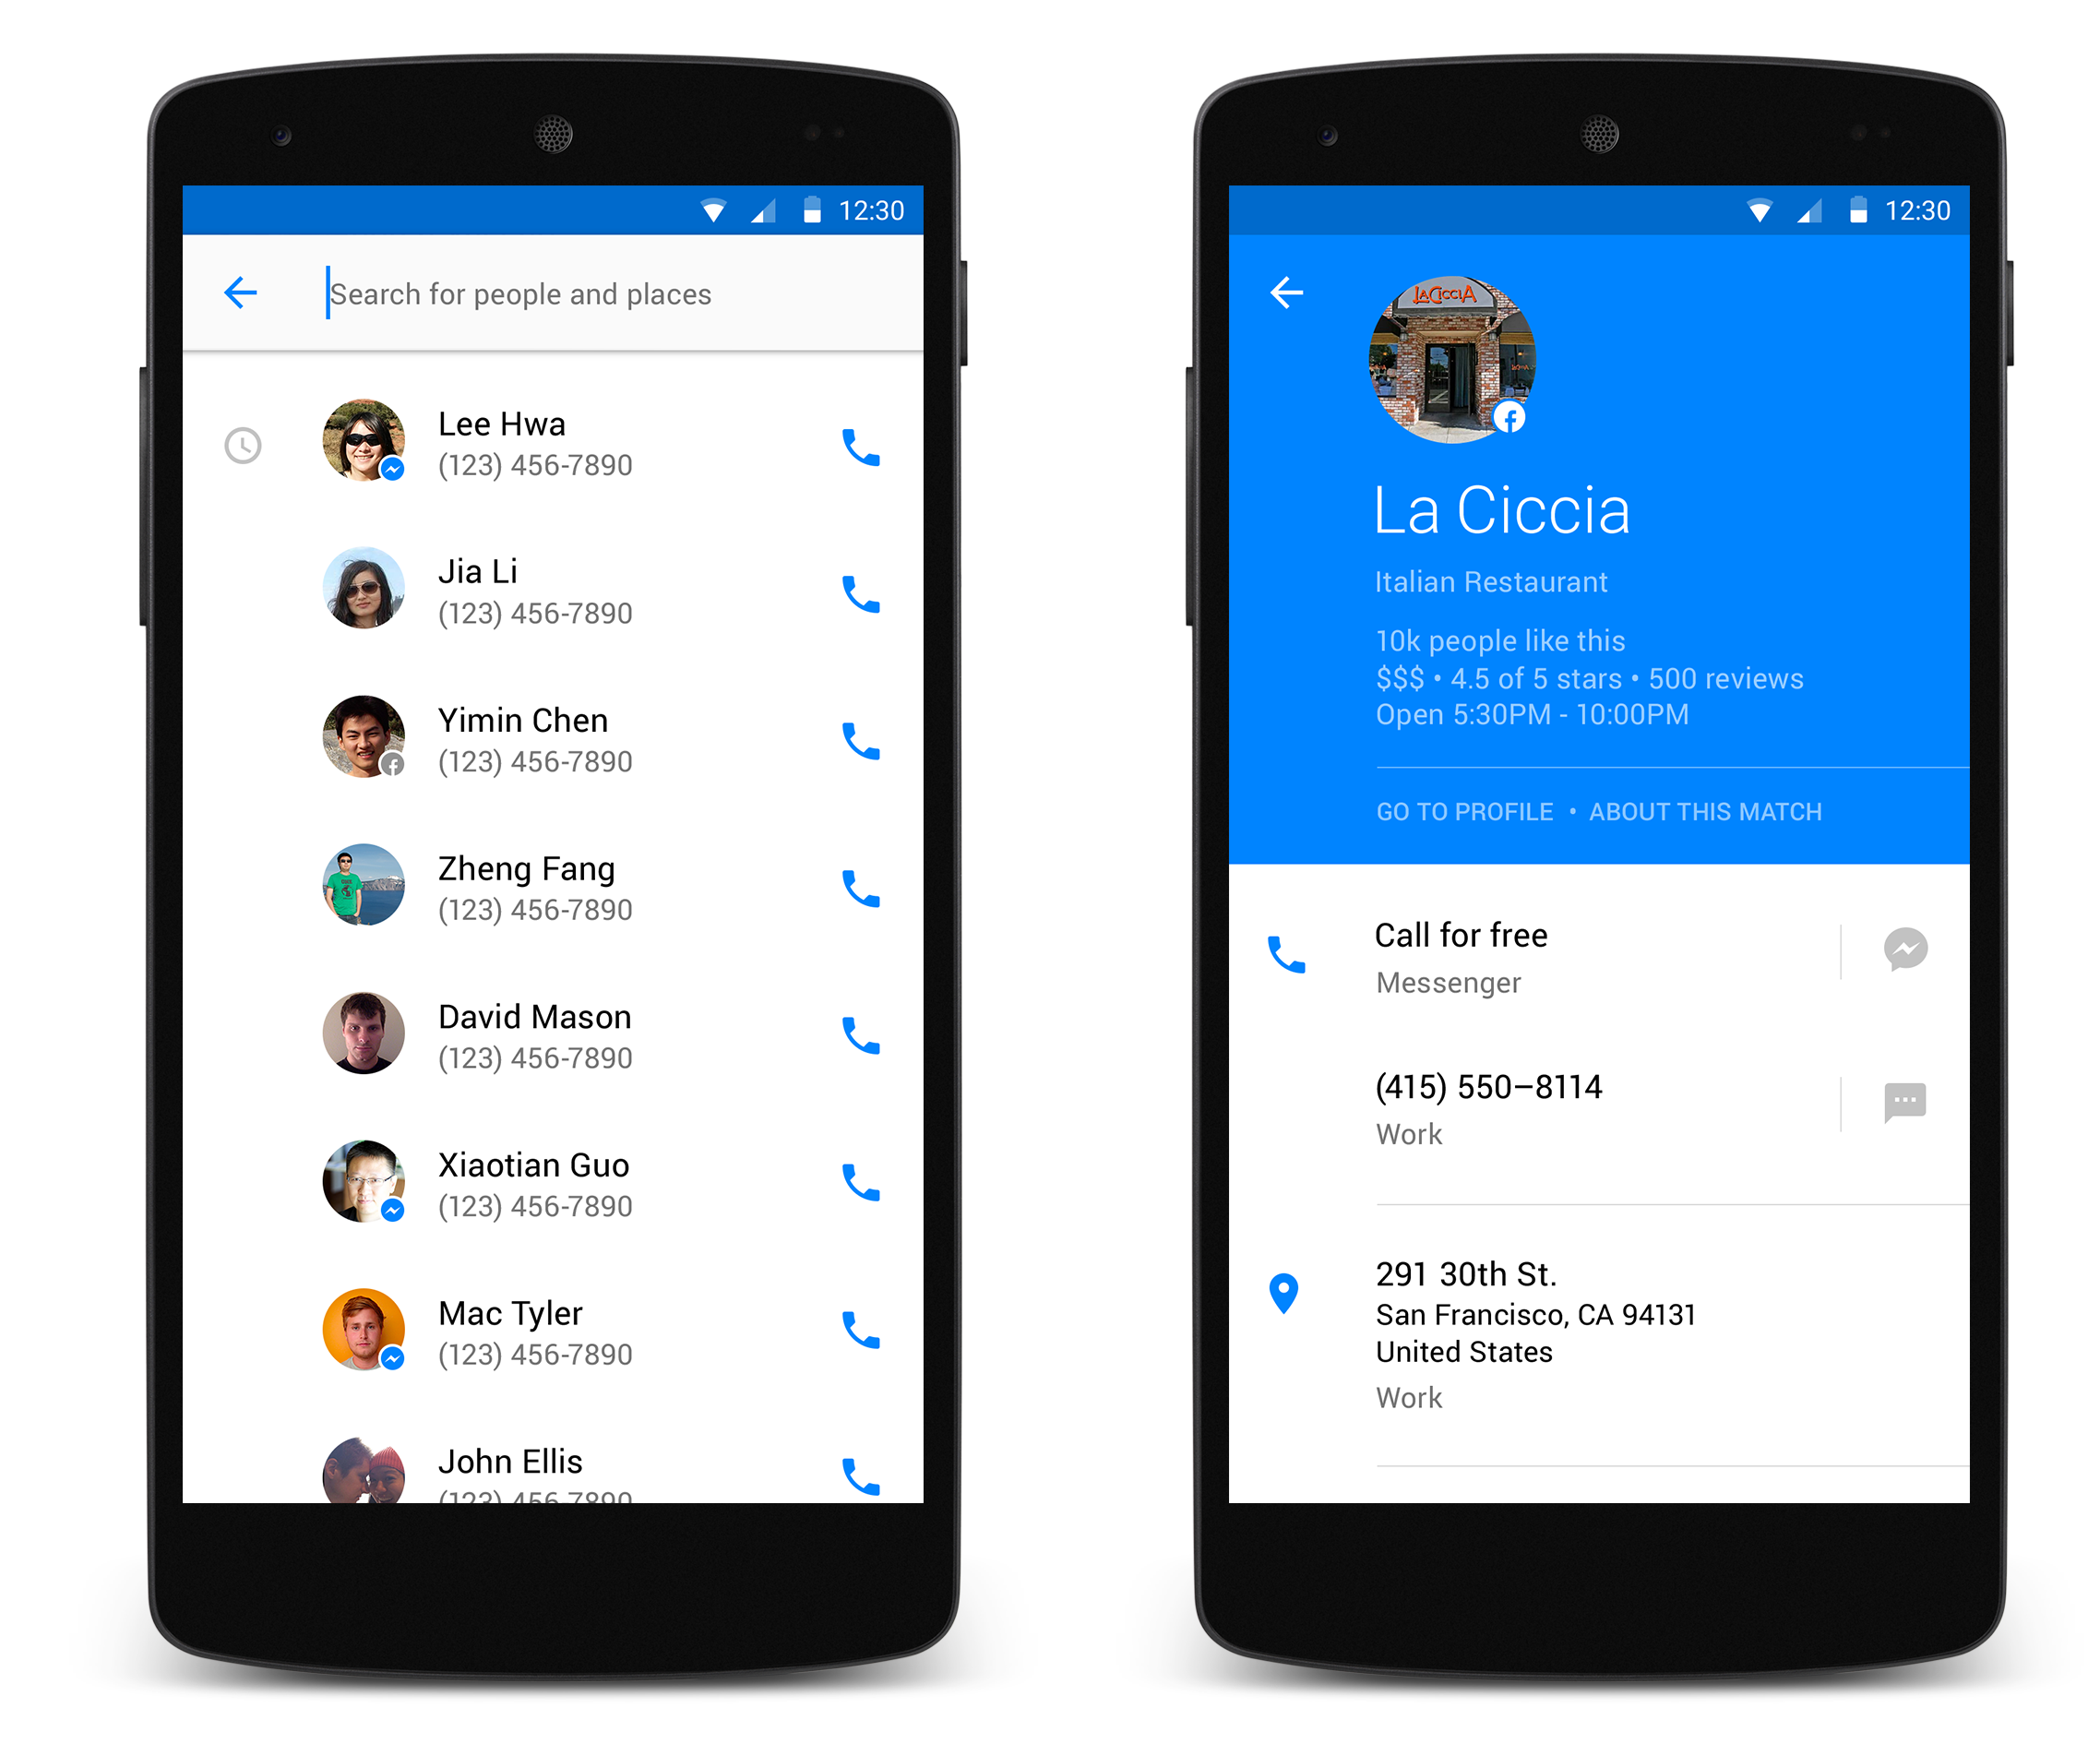 Facebook introduces Hello, an app to replace the Android dialer.